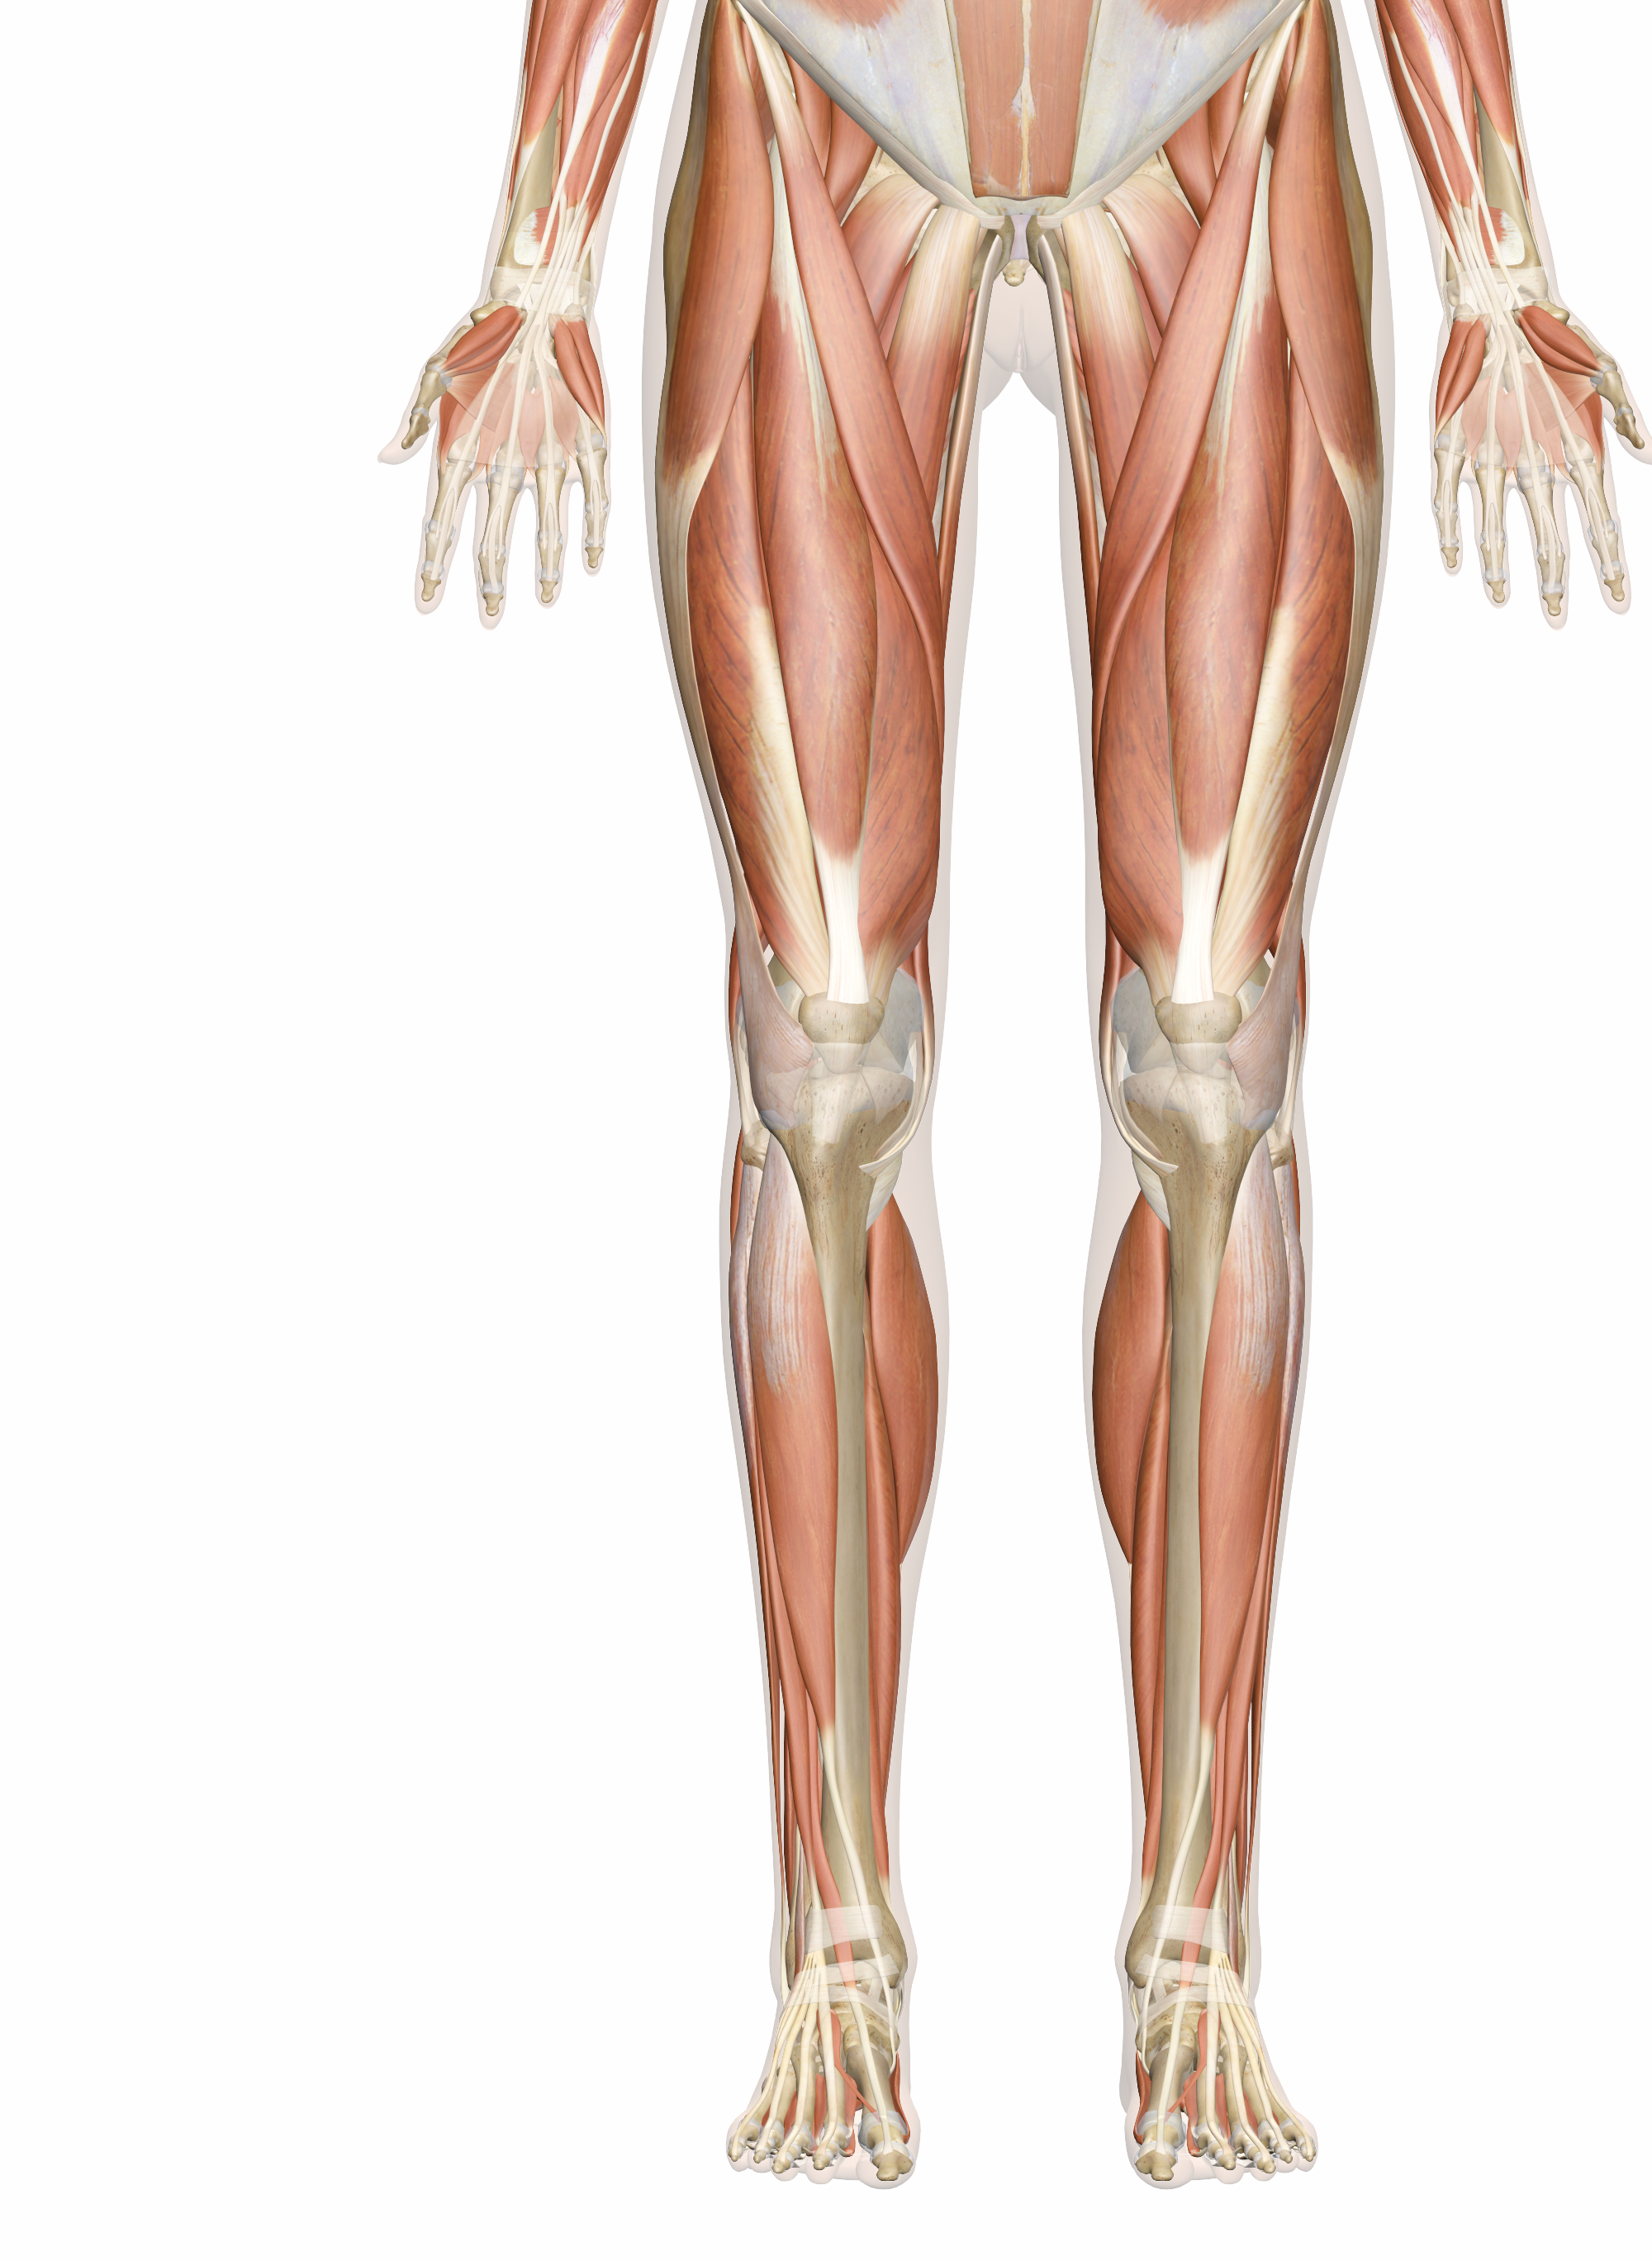 Leg Muscles Diagram Muscles Of The Leg And Foot